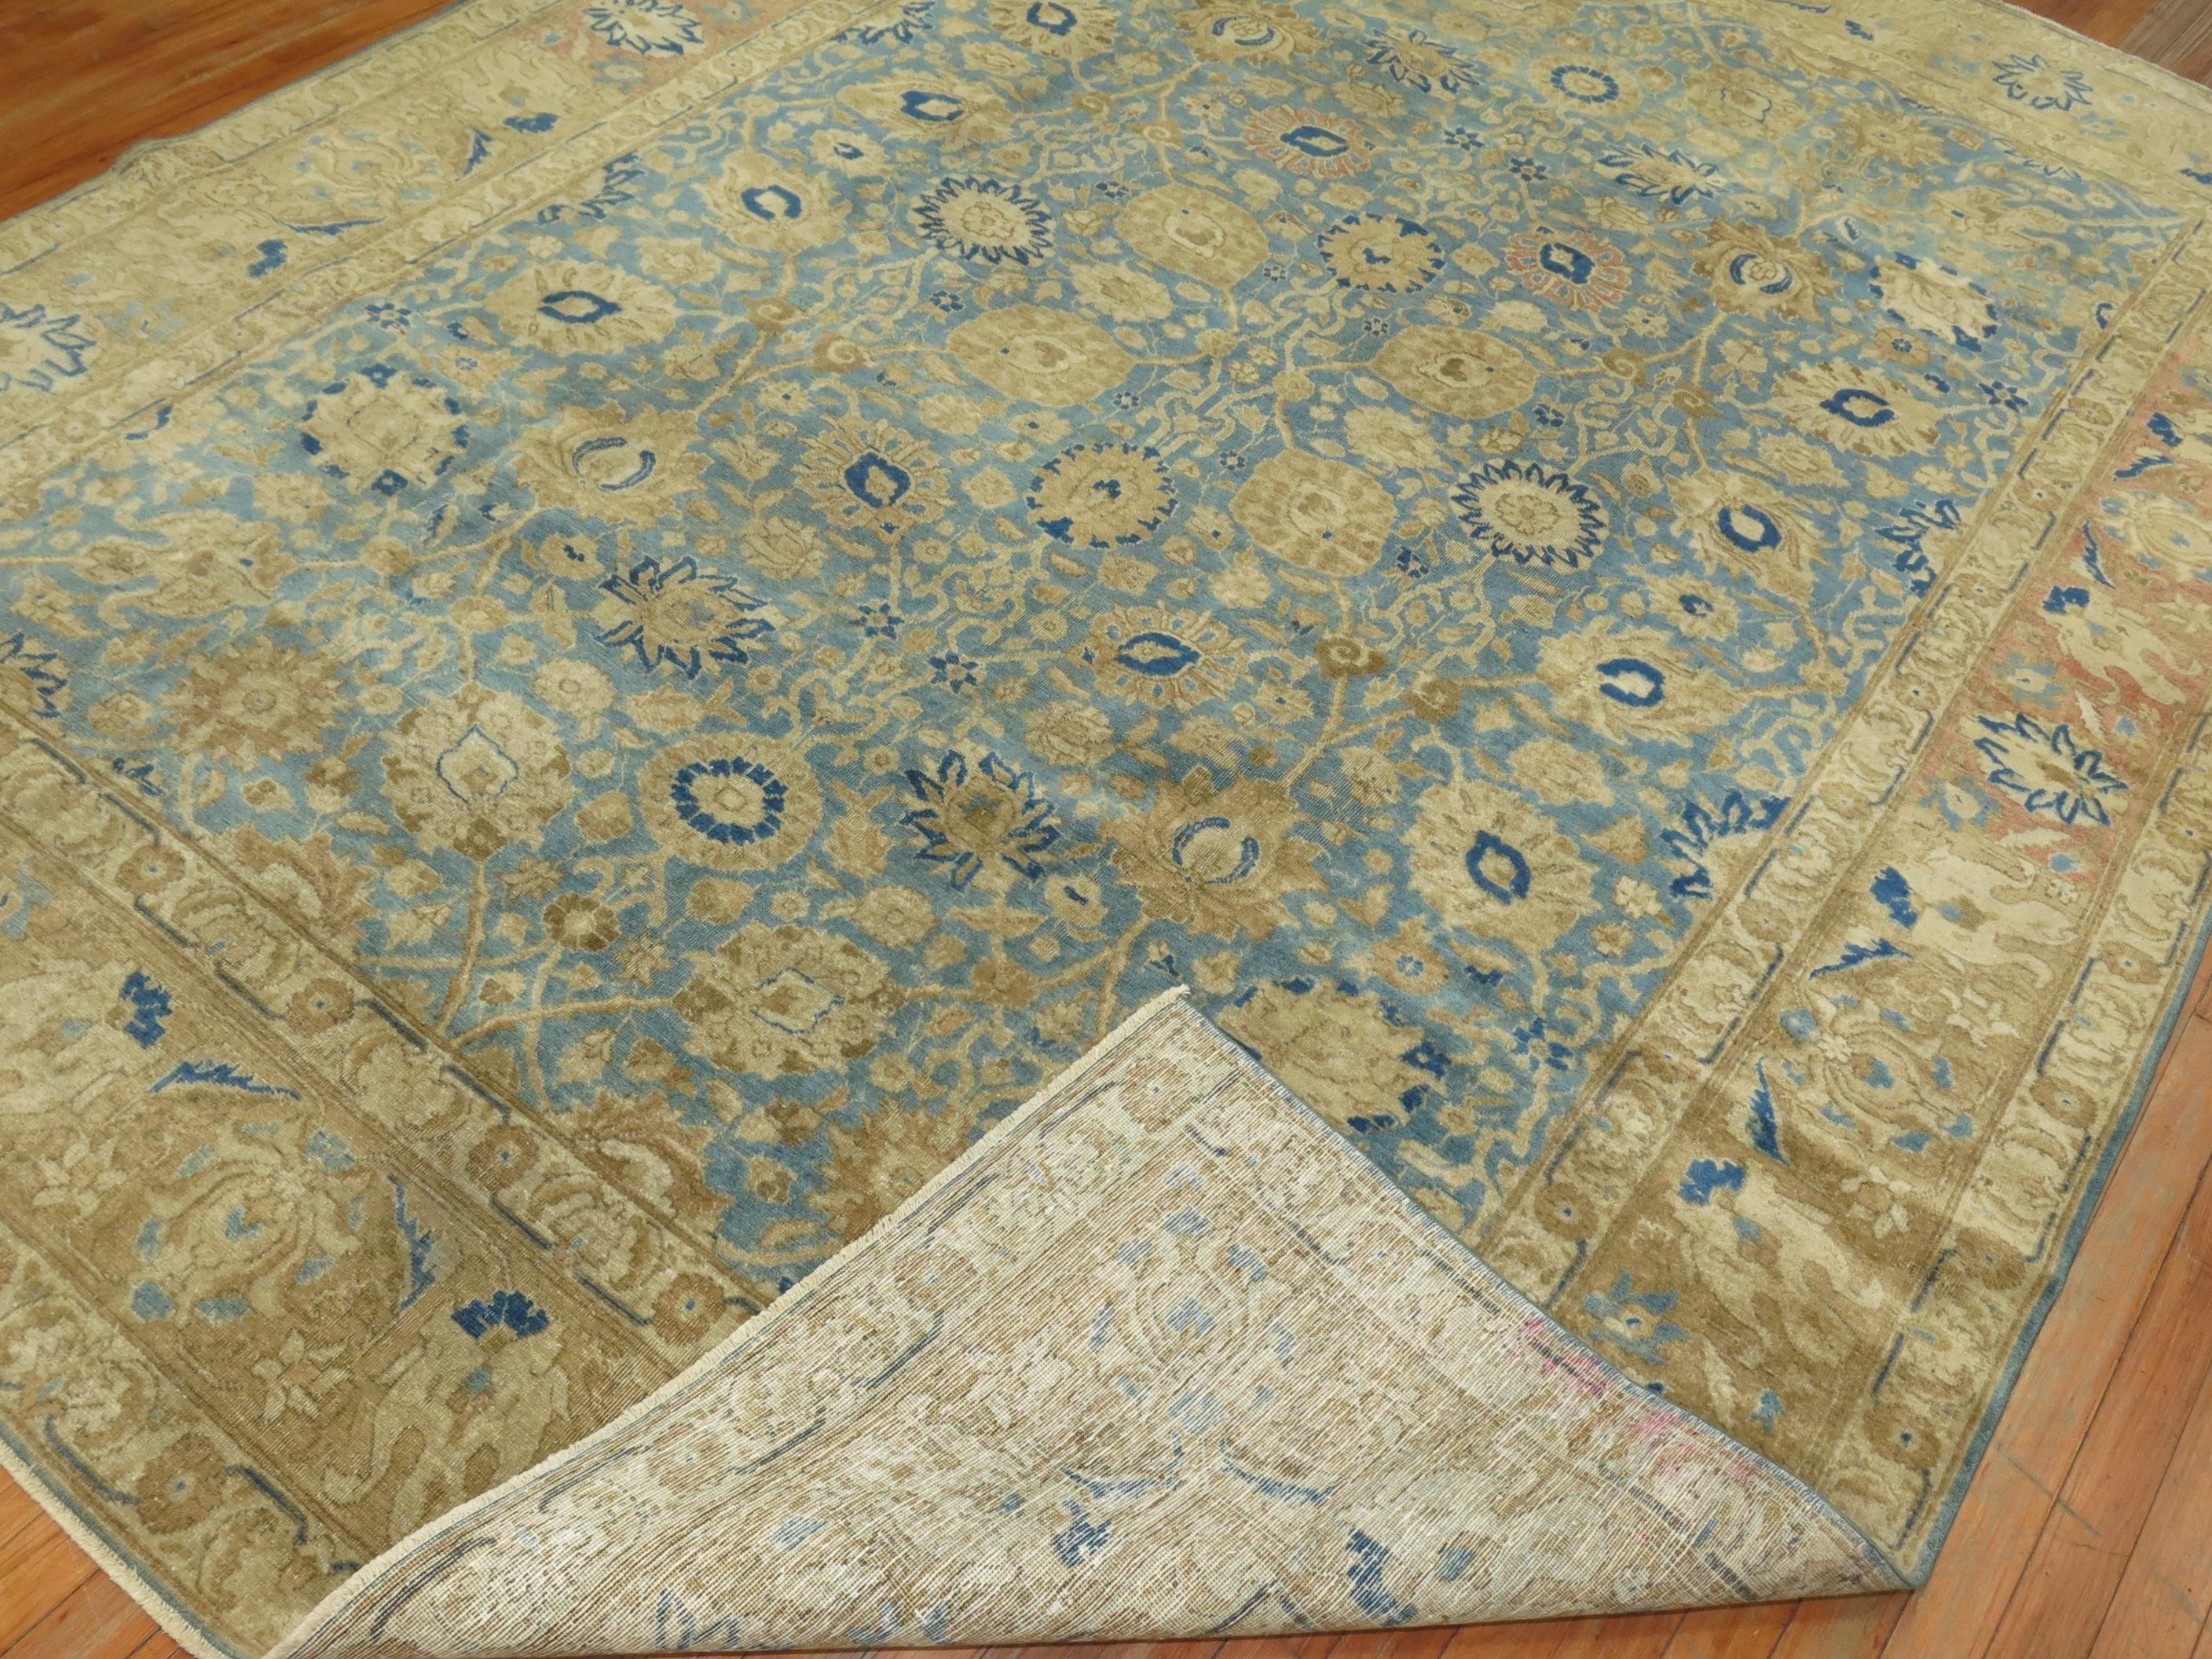 Zabihi Collection Antique Blue Soft Brown Persian Tabriz Rug In Good Condition For Sale In New York, NY